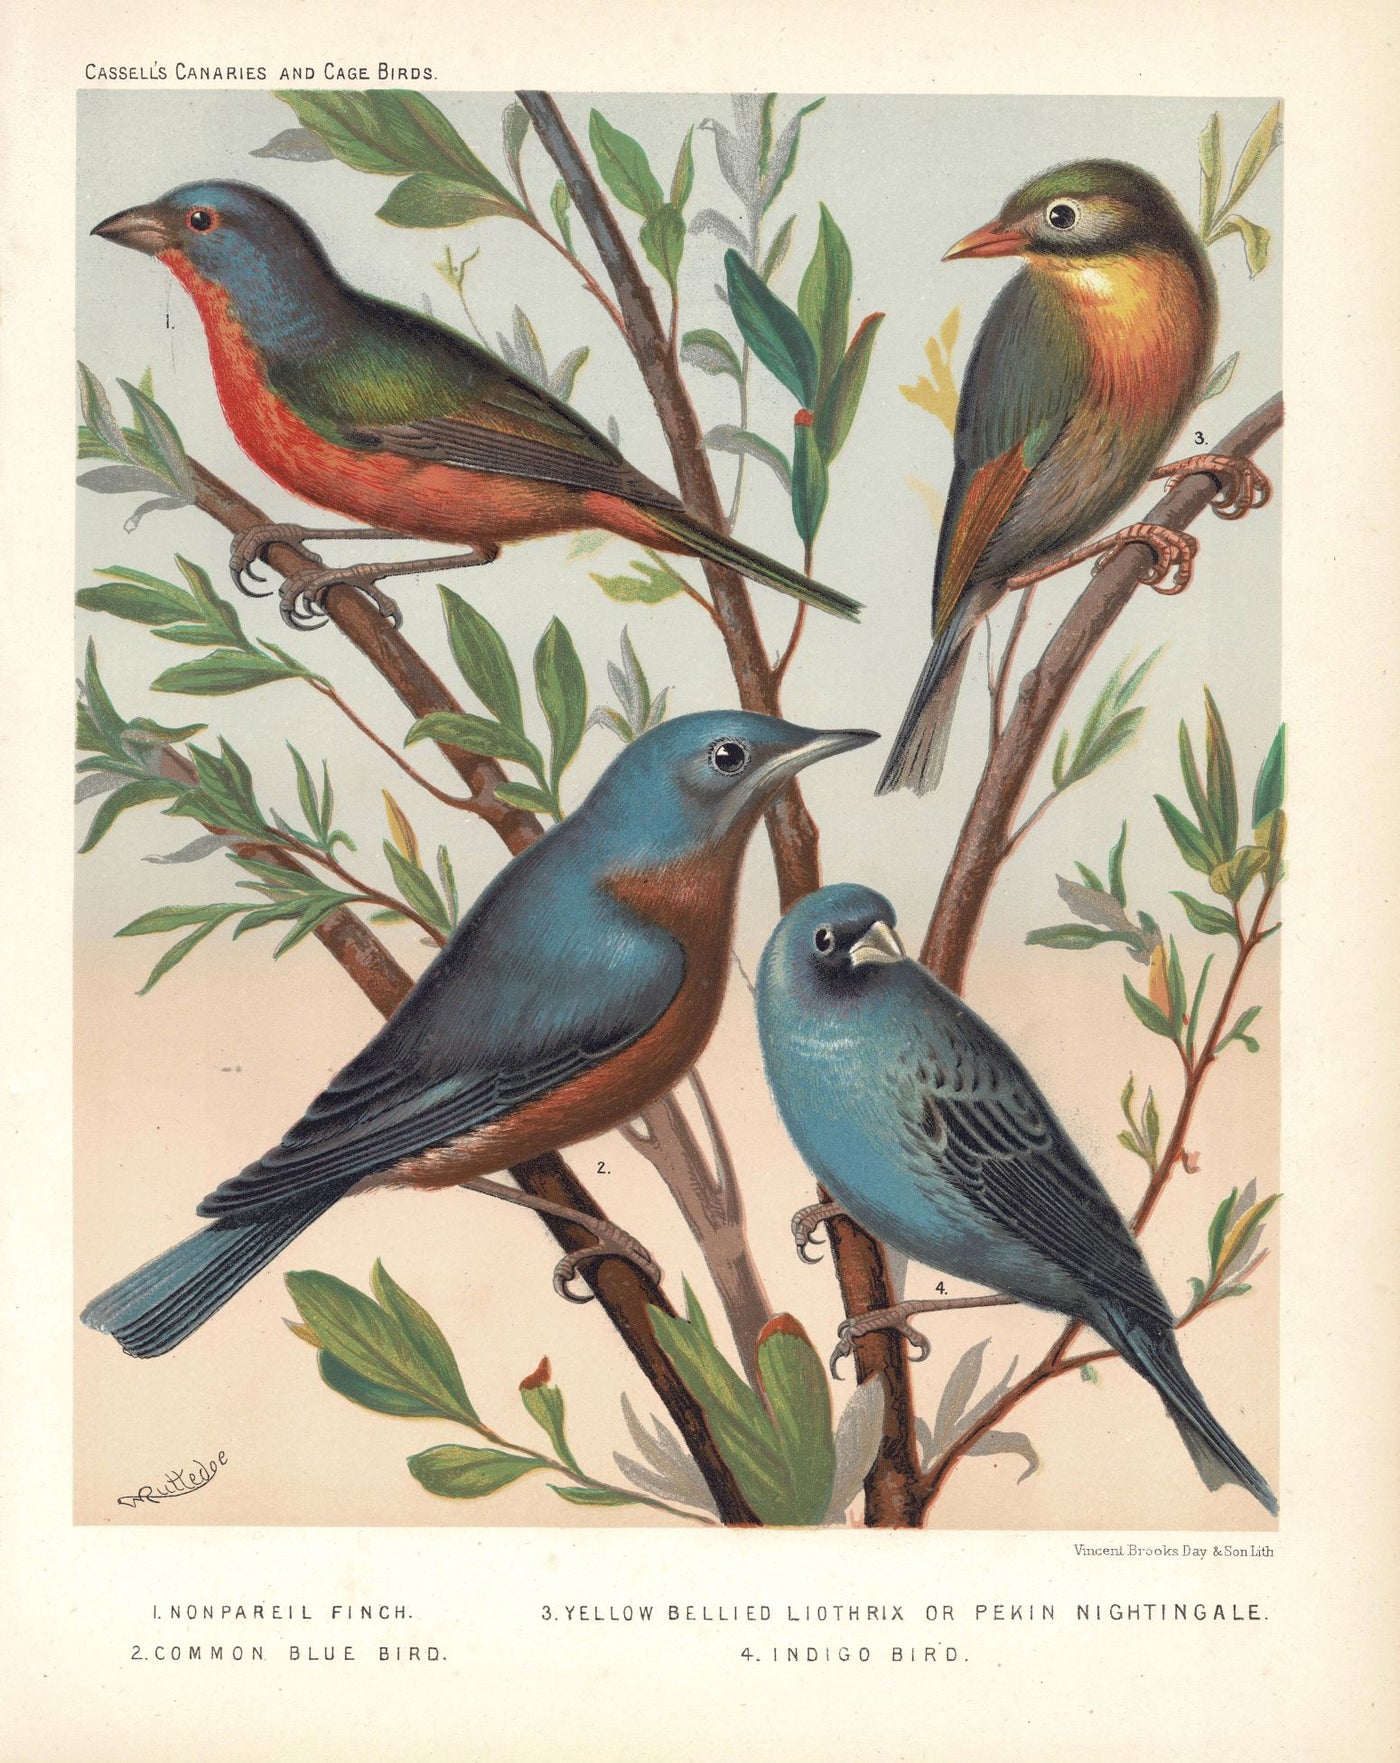 Birds from '...Canaries and cagebirds.' antique print published 1878